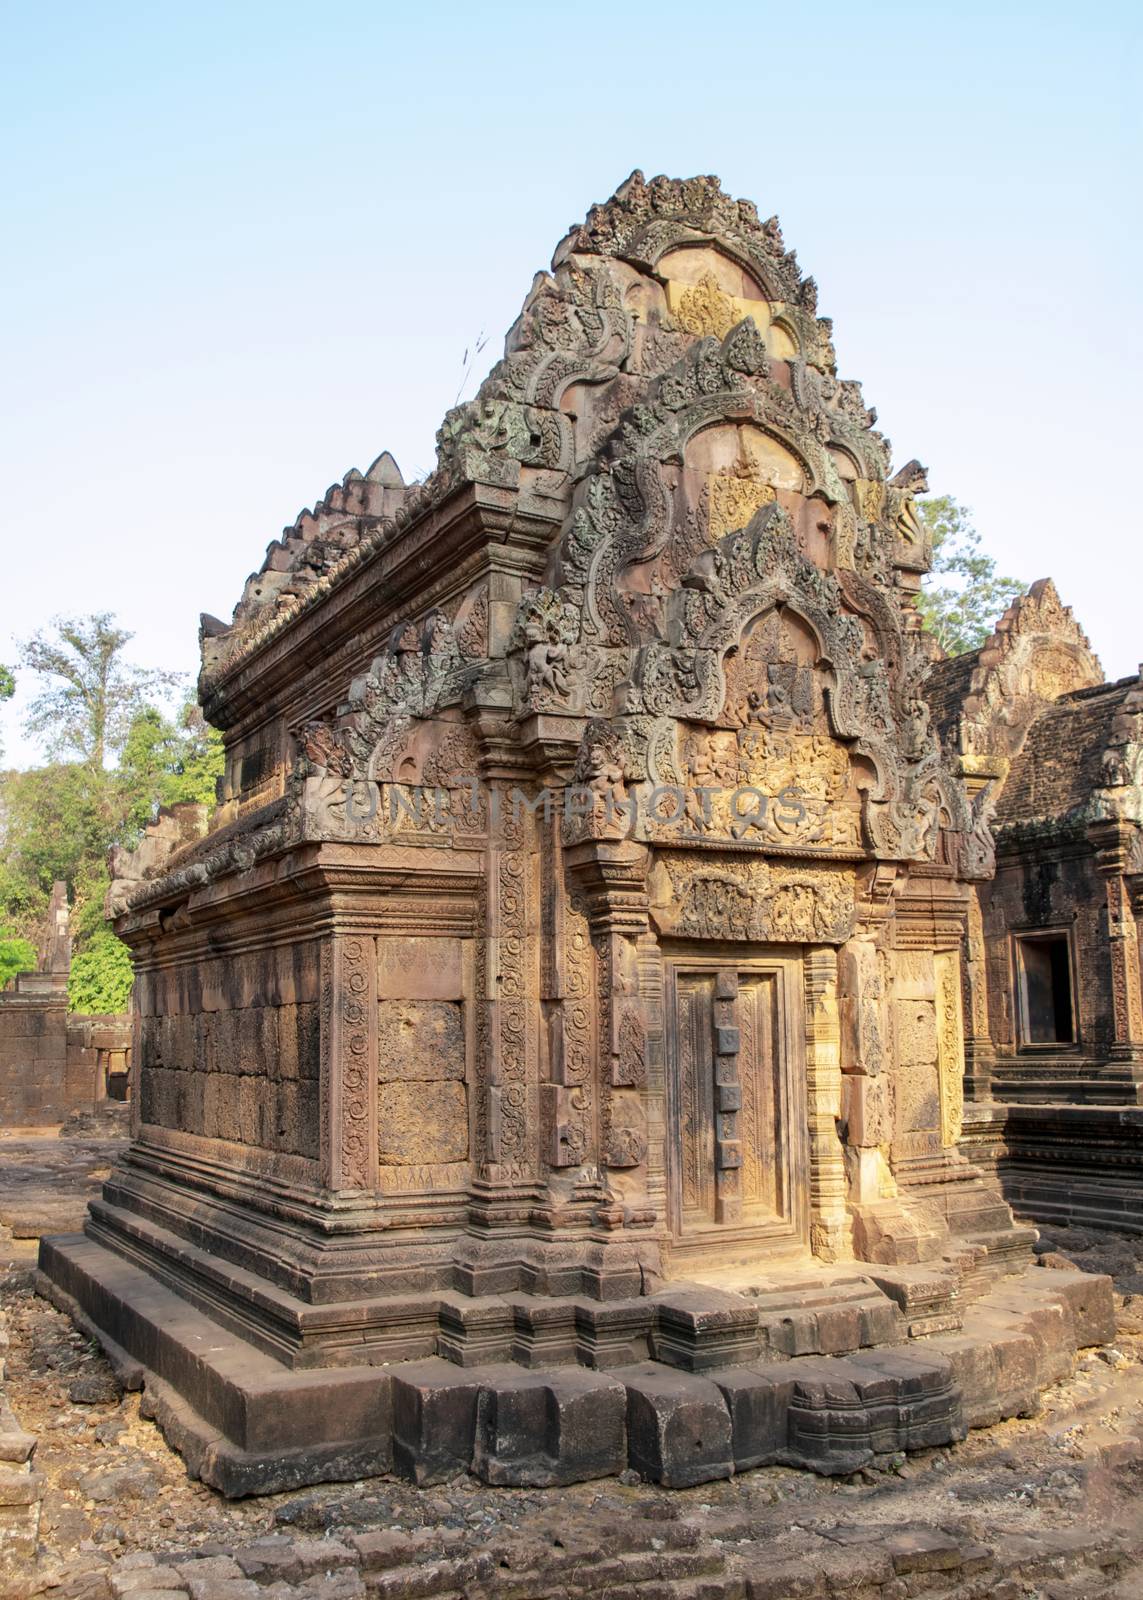 Cambodia, Banteay Seay - March 2016 - Reconstructed ruins of ornately carved 10th-century, red sand stone, temple dedicated to the Hindu god Shiva, bathed in the early morning light